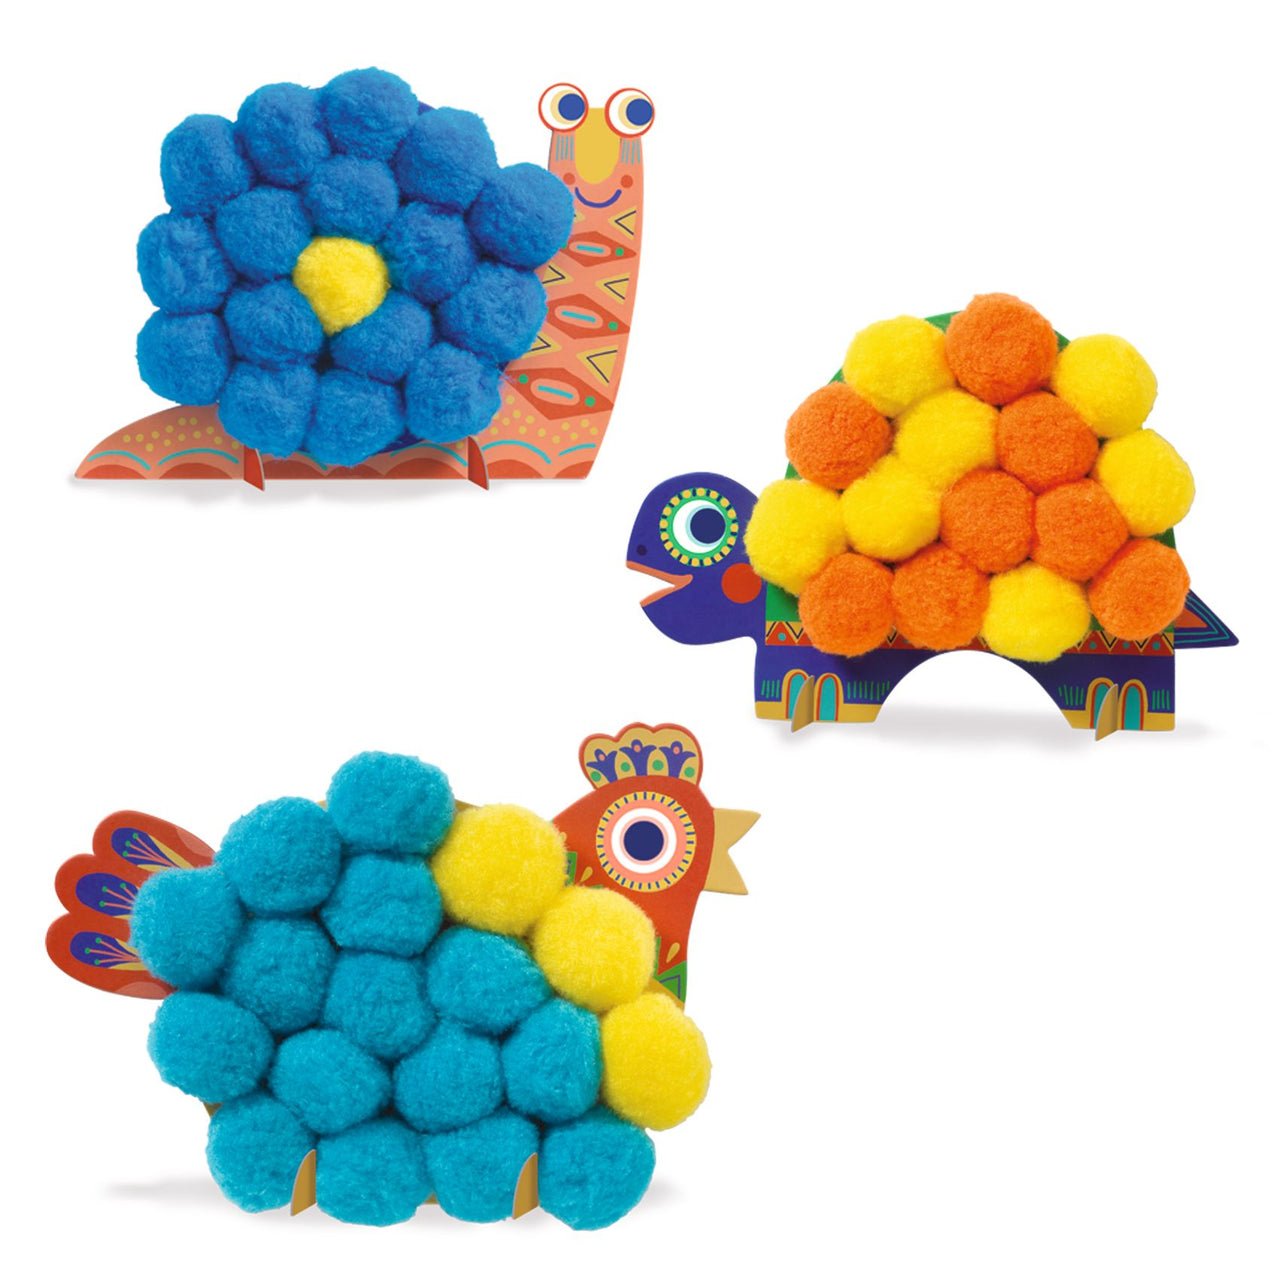 A pasting activity to complete the 3 animals with large pompoms. Children copy the examples in the instructions booklet and stick coloured pompoms onto the sticky parts of the 3 animals. Surprise - 3 gentle animals appear, ready for pets!